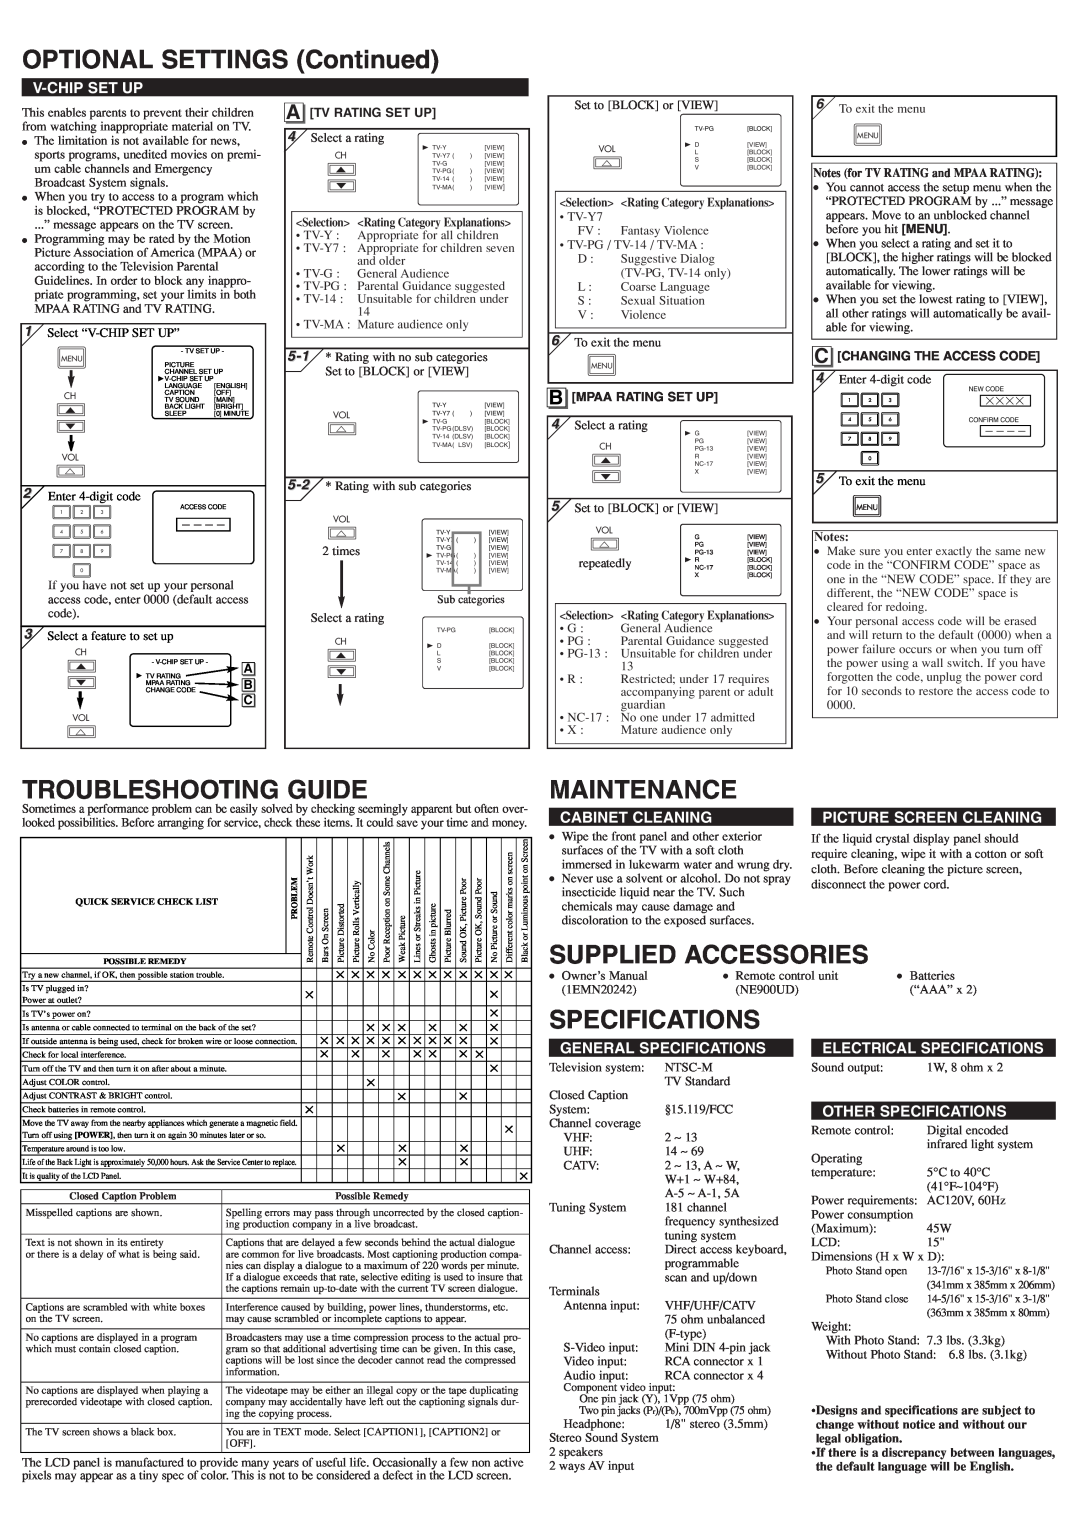 Sylvania 6615LF4 OPTIONAL SETTINGS Continued, Troubleshooting Guide, Maintenance, Specifications, V-Chip Set Up 